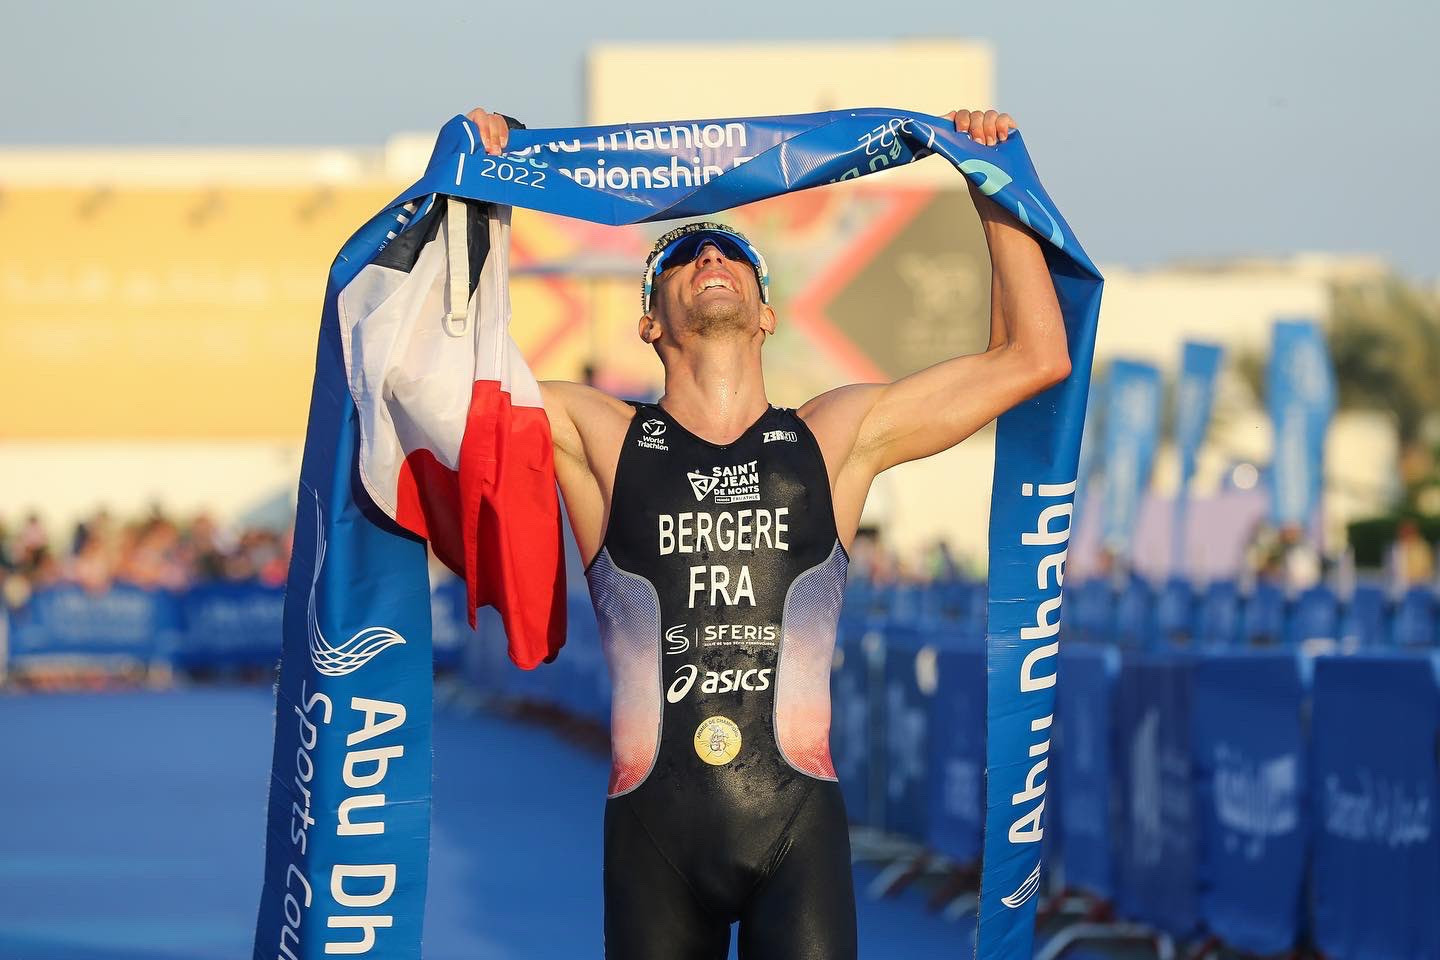 France's Léo Bergère won the world title with his first Championship Series victory of the season ©World Triathlon